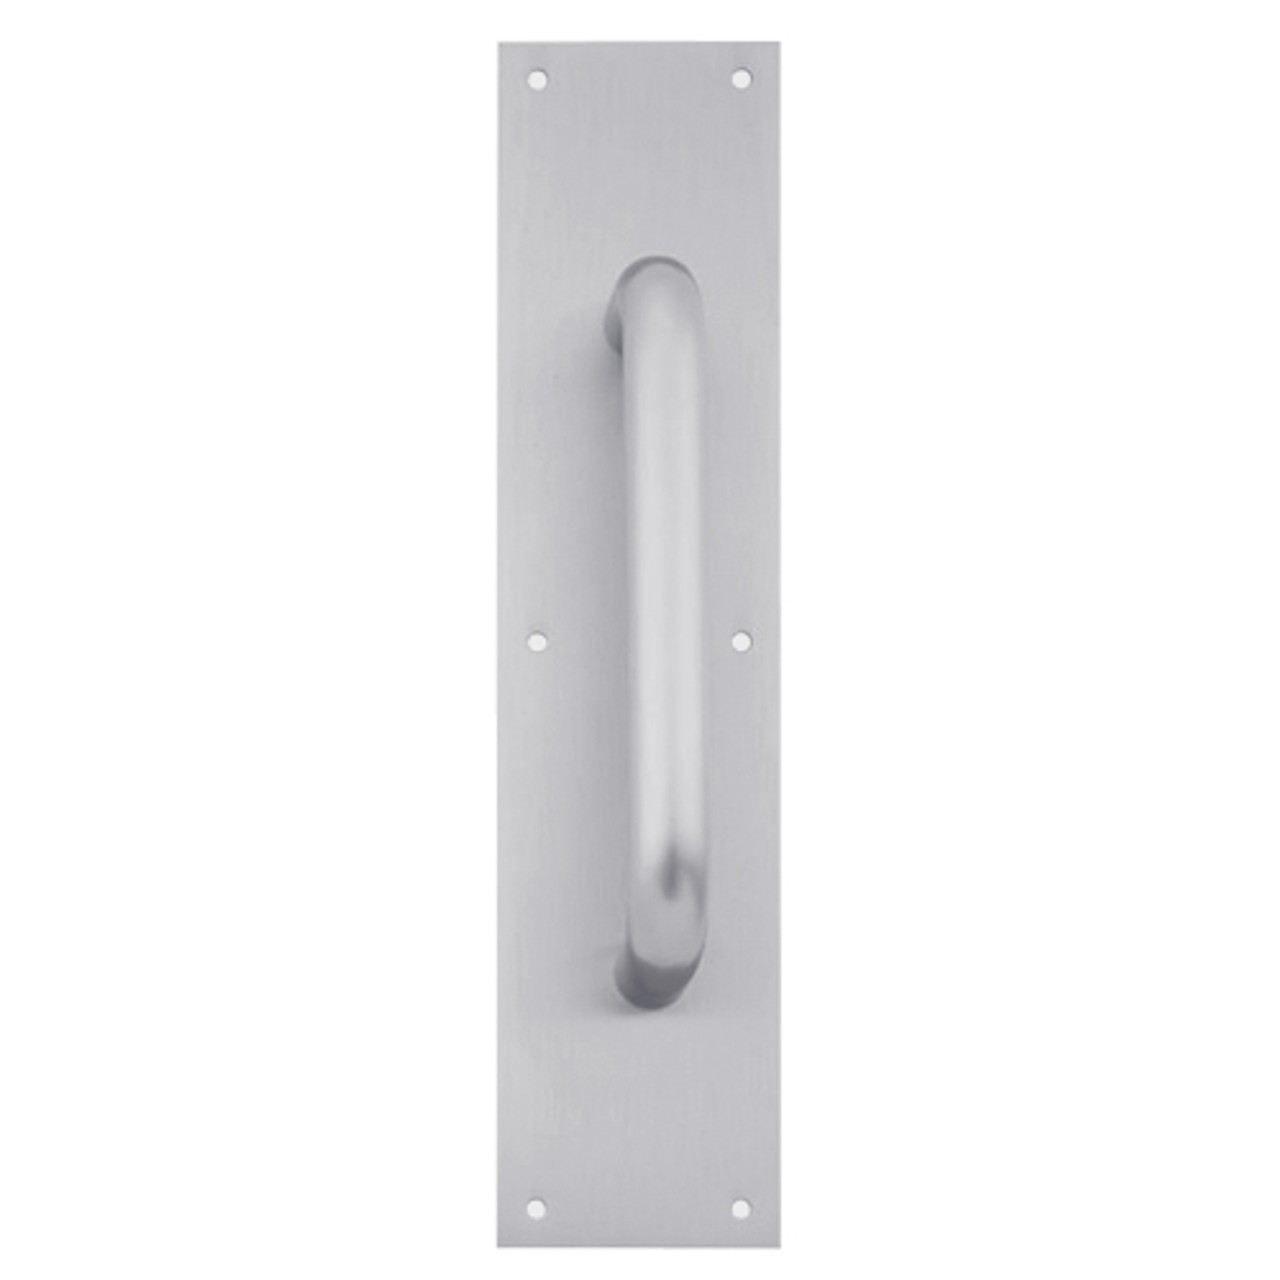 8303-10-US26D-6x16 IVES Architectural Door Trim 6x16 Inch Pull Plate in Satin Chrome